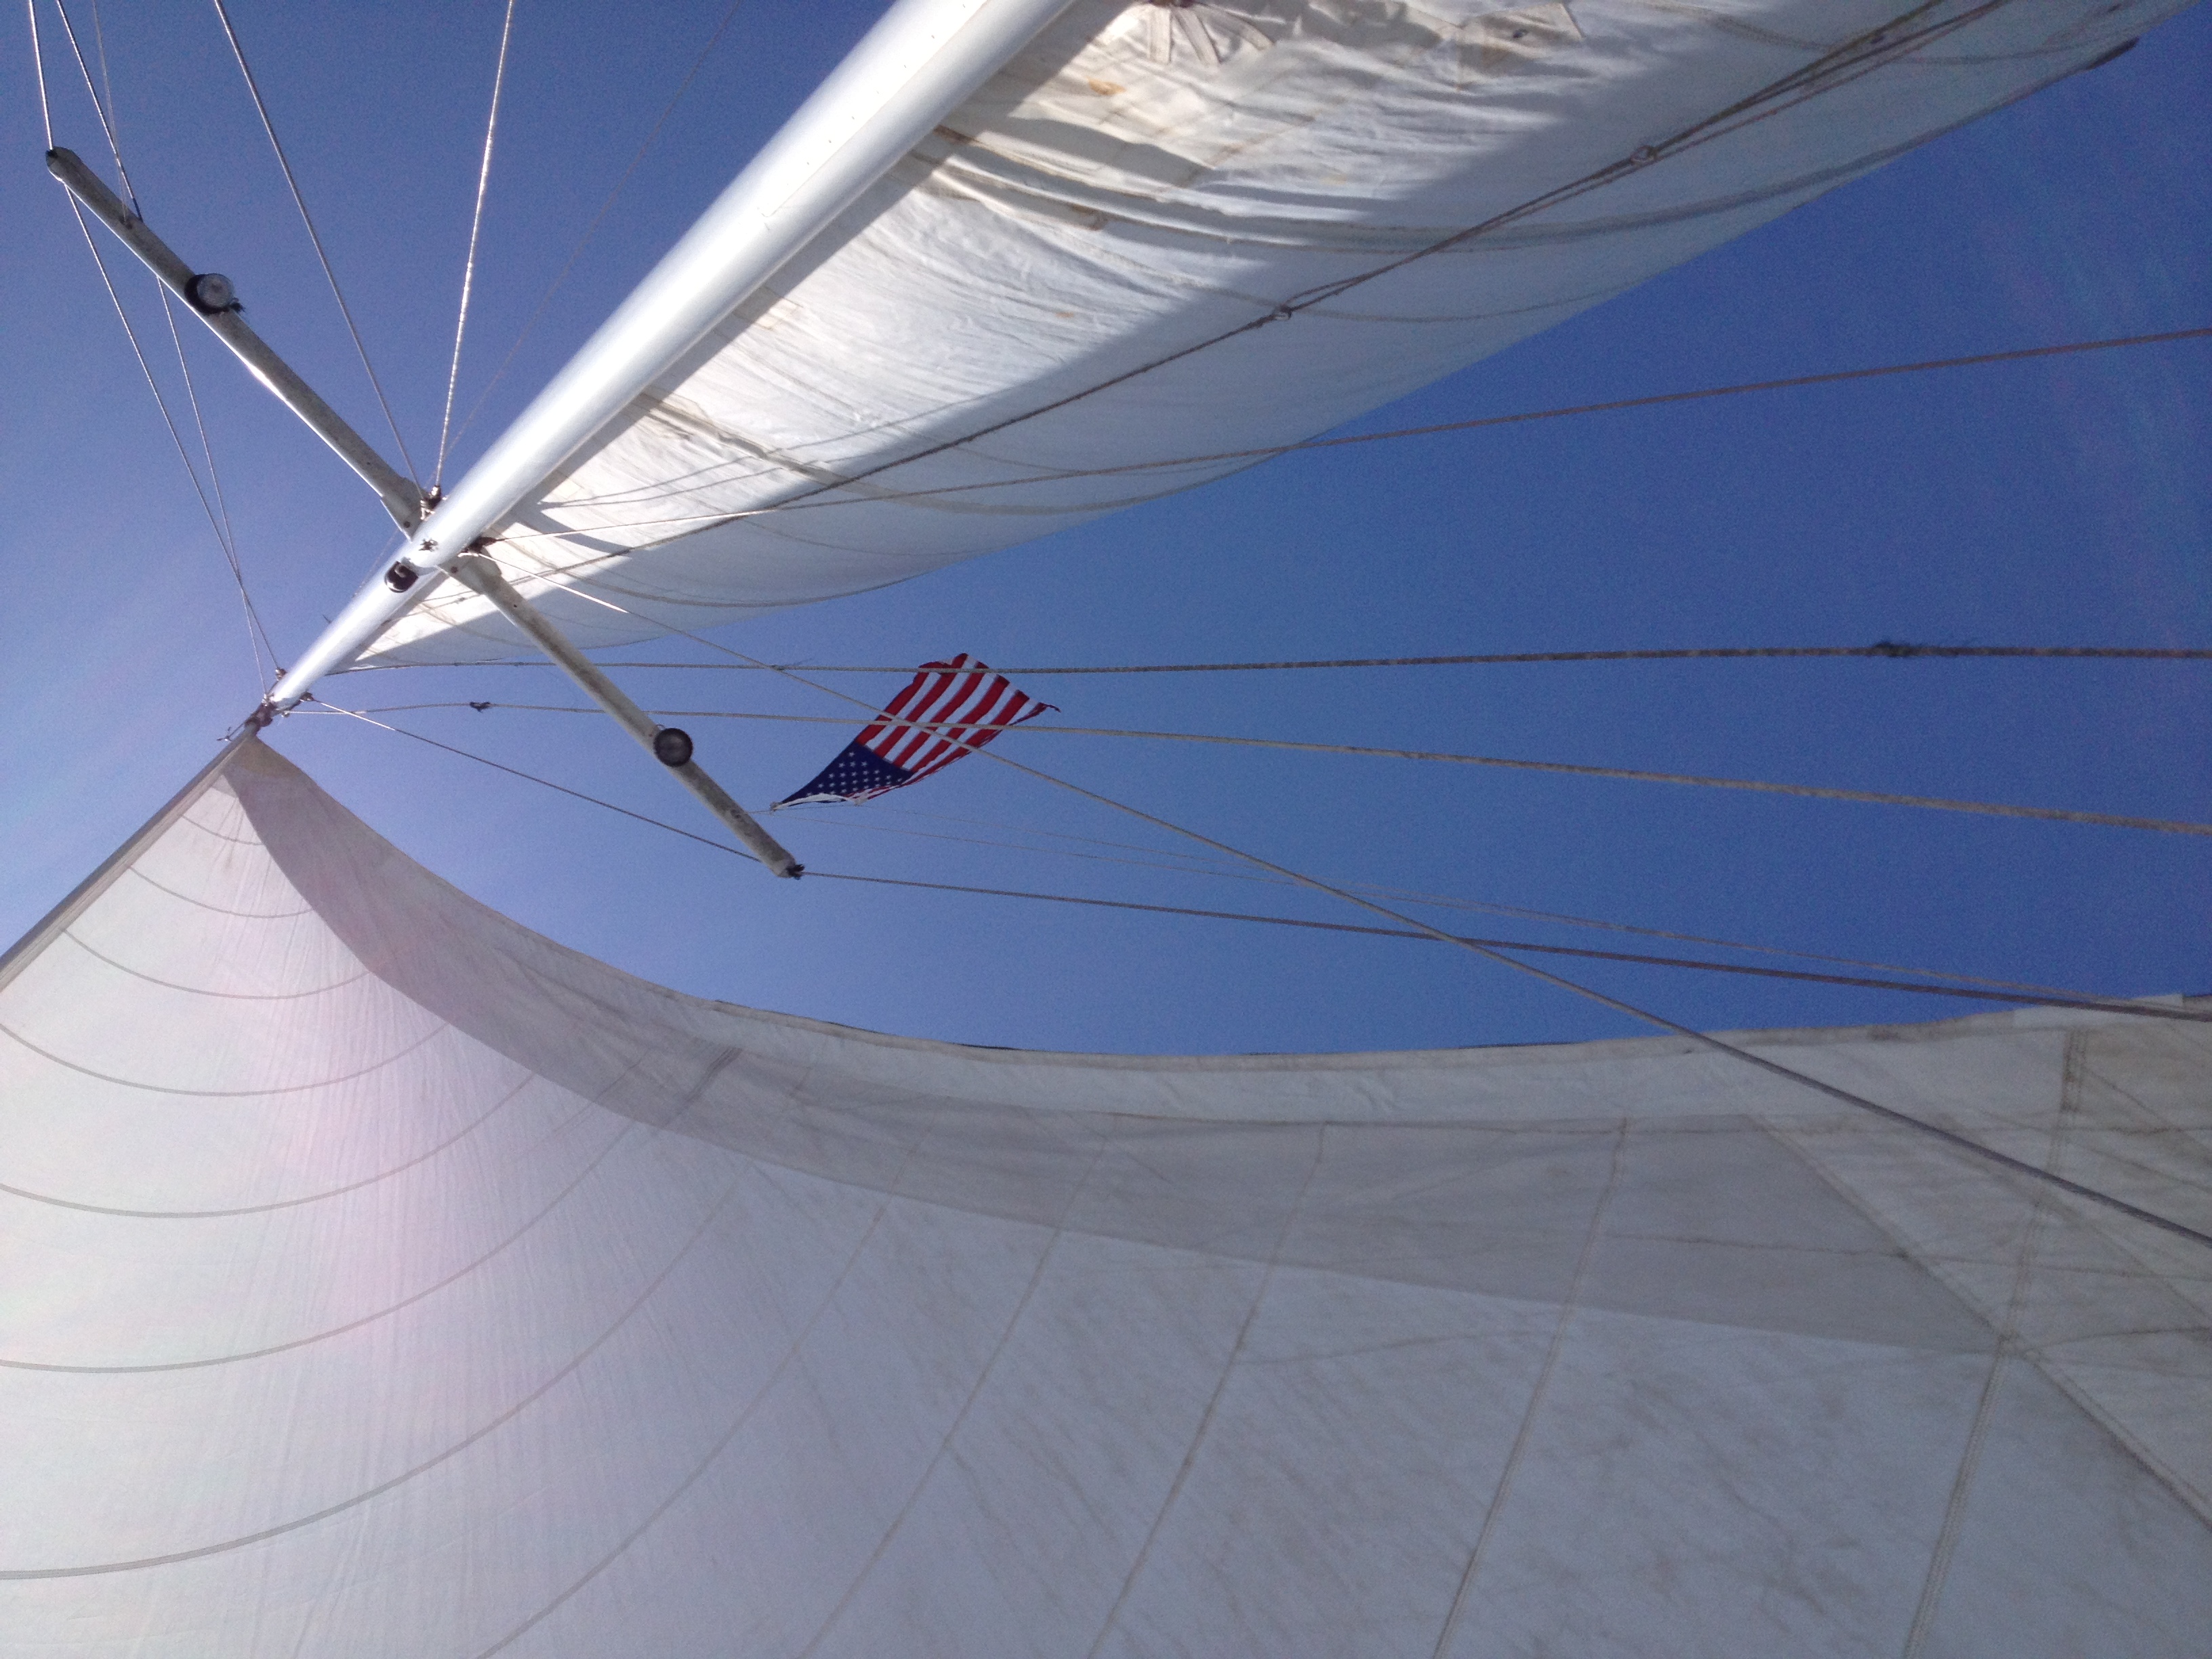 1979 Morgan 415 Out Island Ketch Sailboat for sale in St Petersburg, FL - image 1 